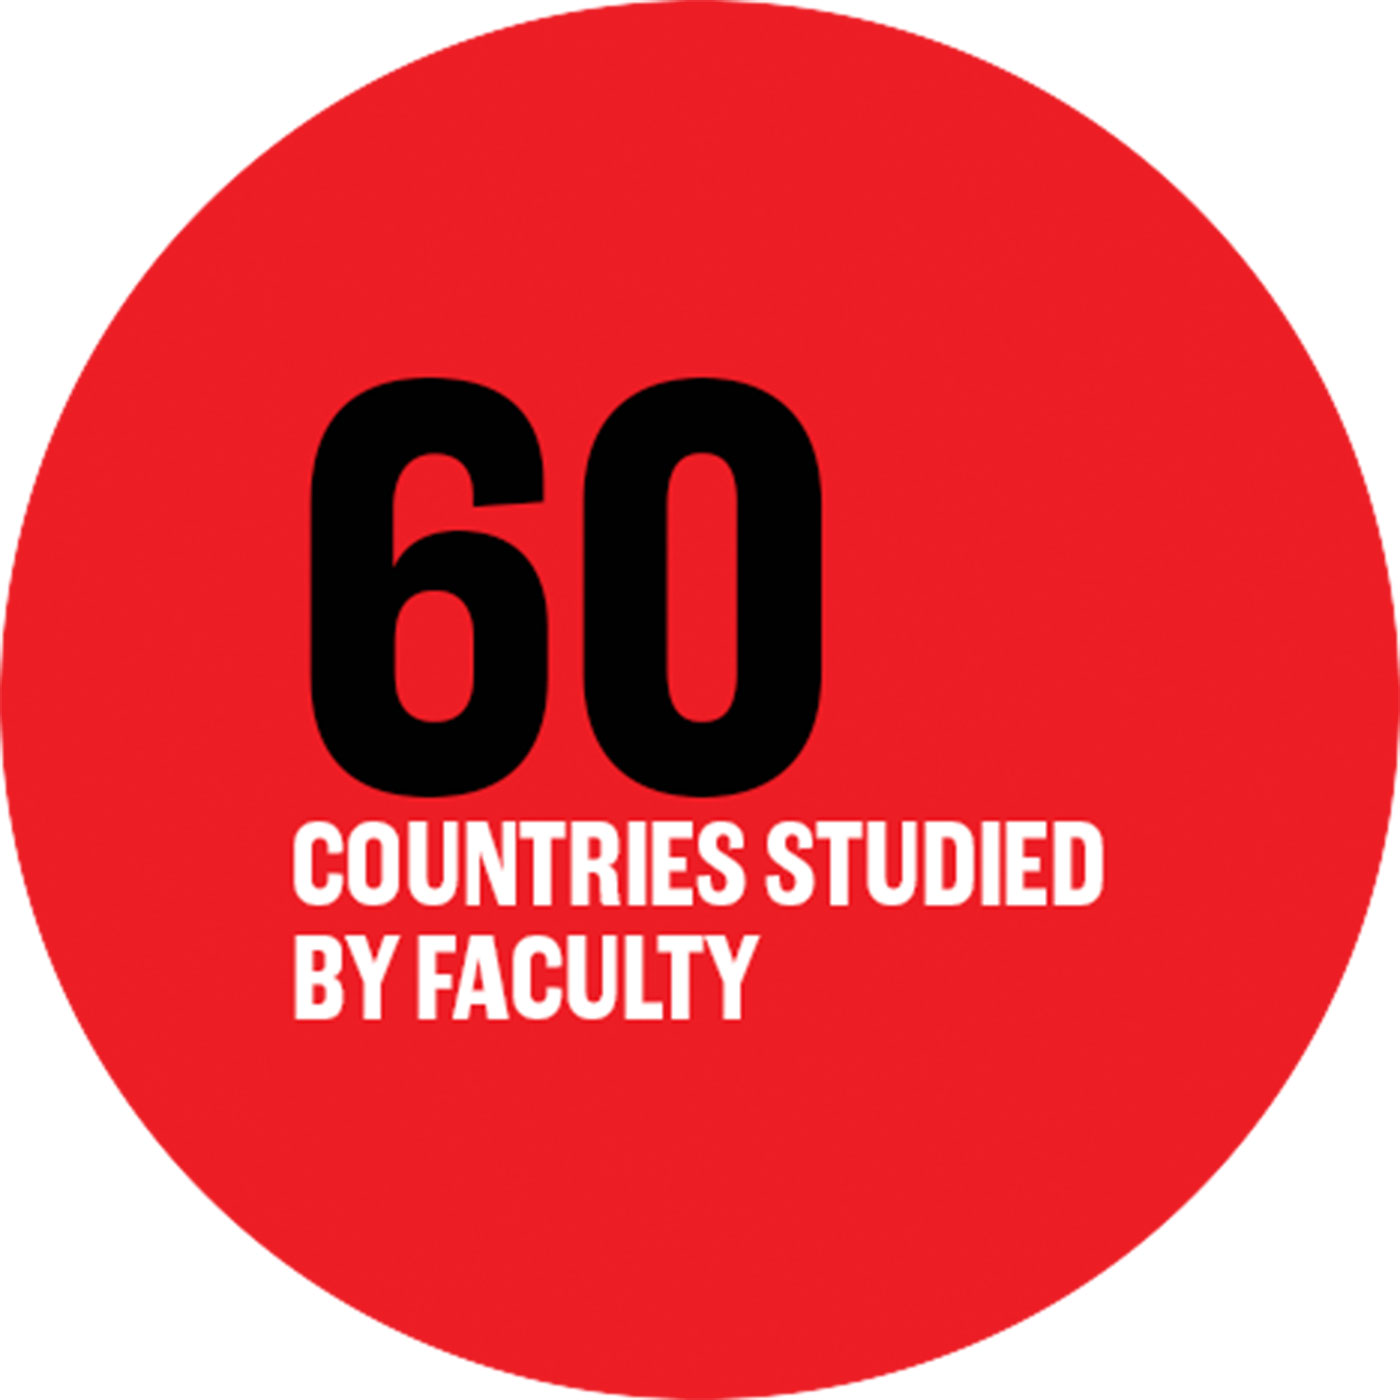 60 countries studied by faculty